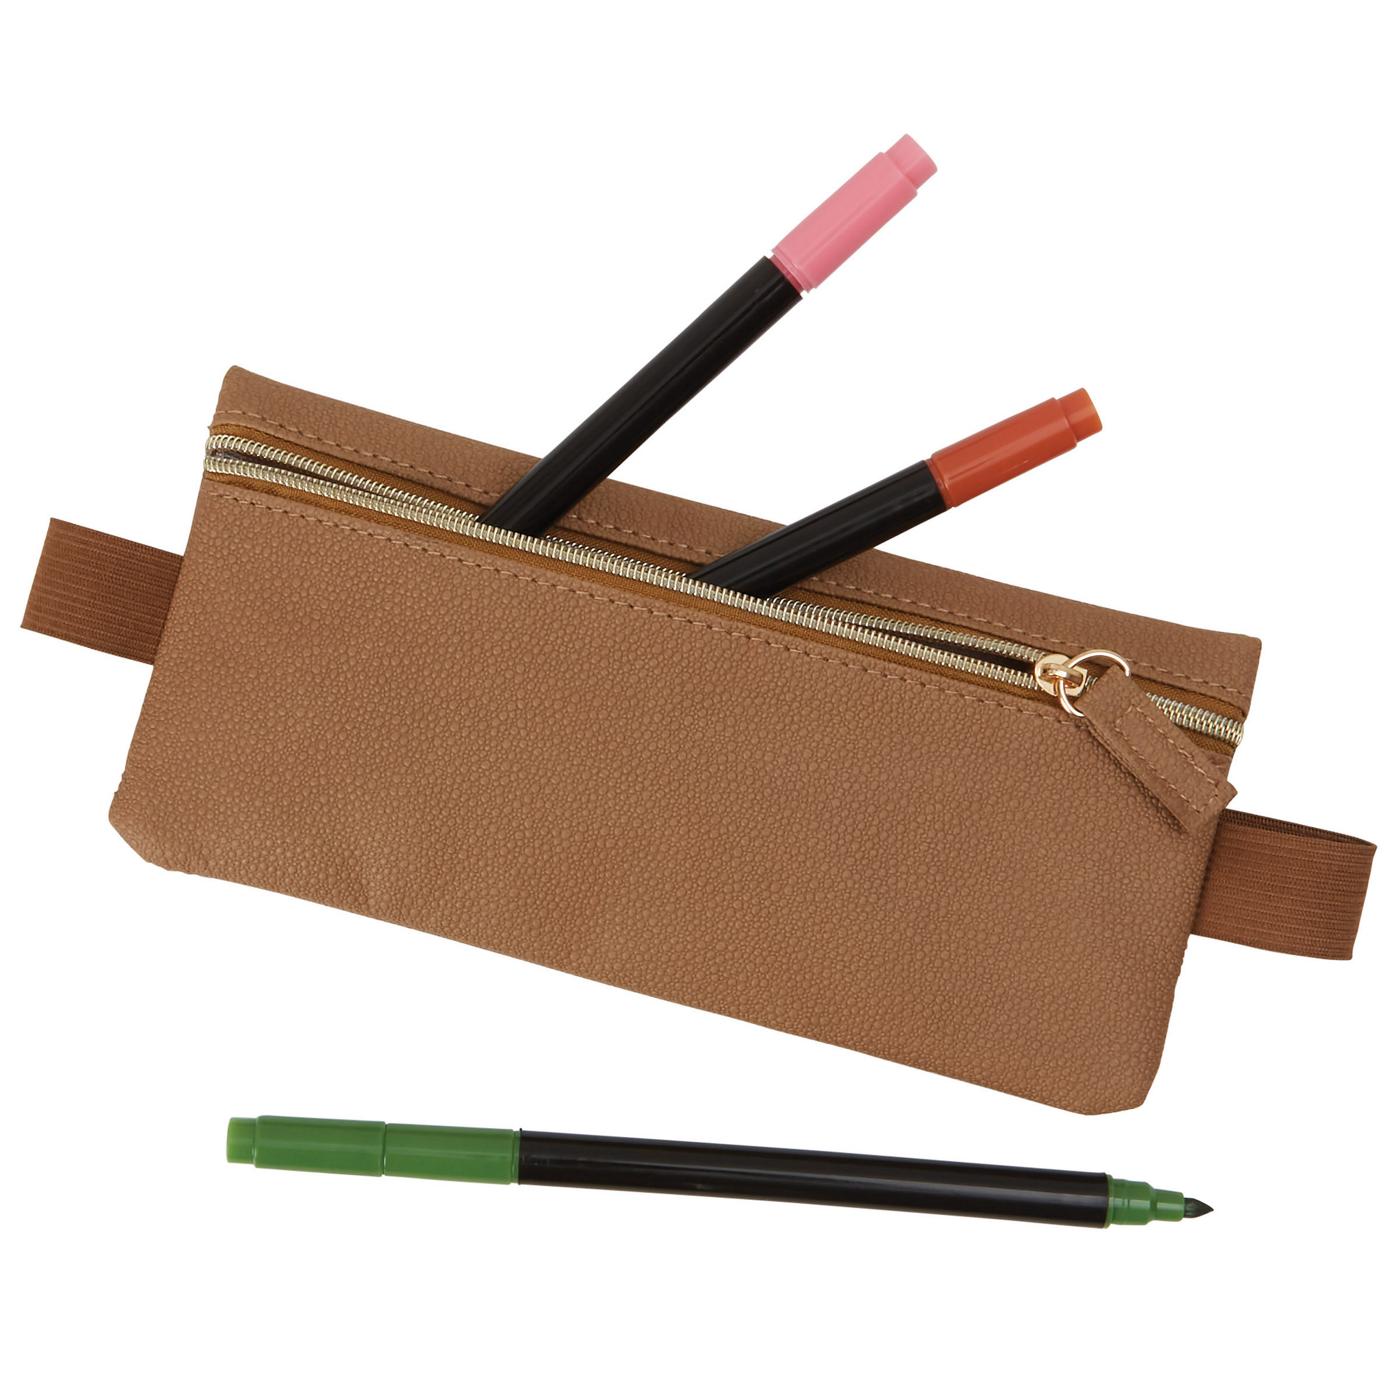 C.R. Gibson Leatherette Pencil Pouch & Marker Set; image 2 of 2